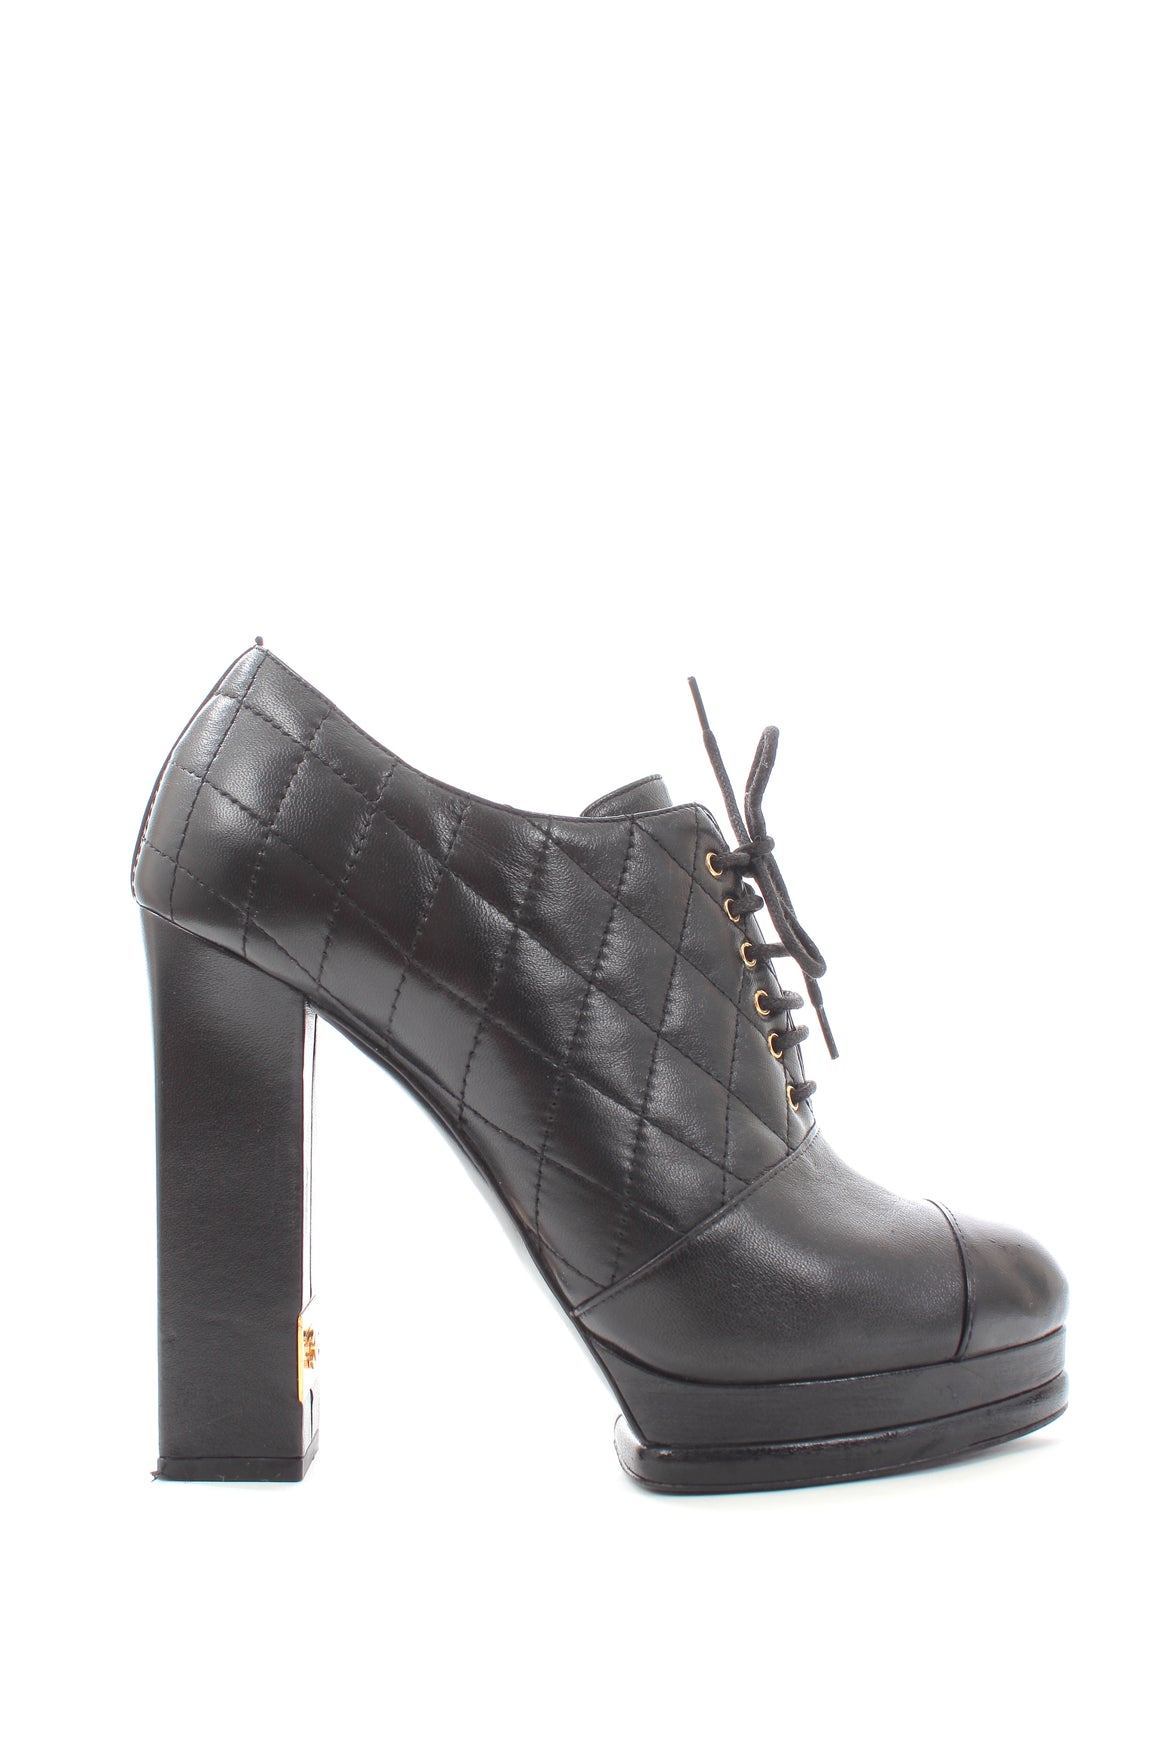 Chanel Quilted Leather Lace-Up Platform Ankle Boots